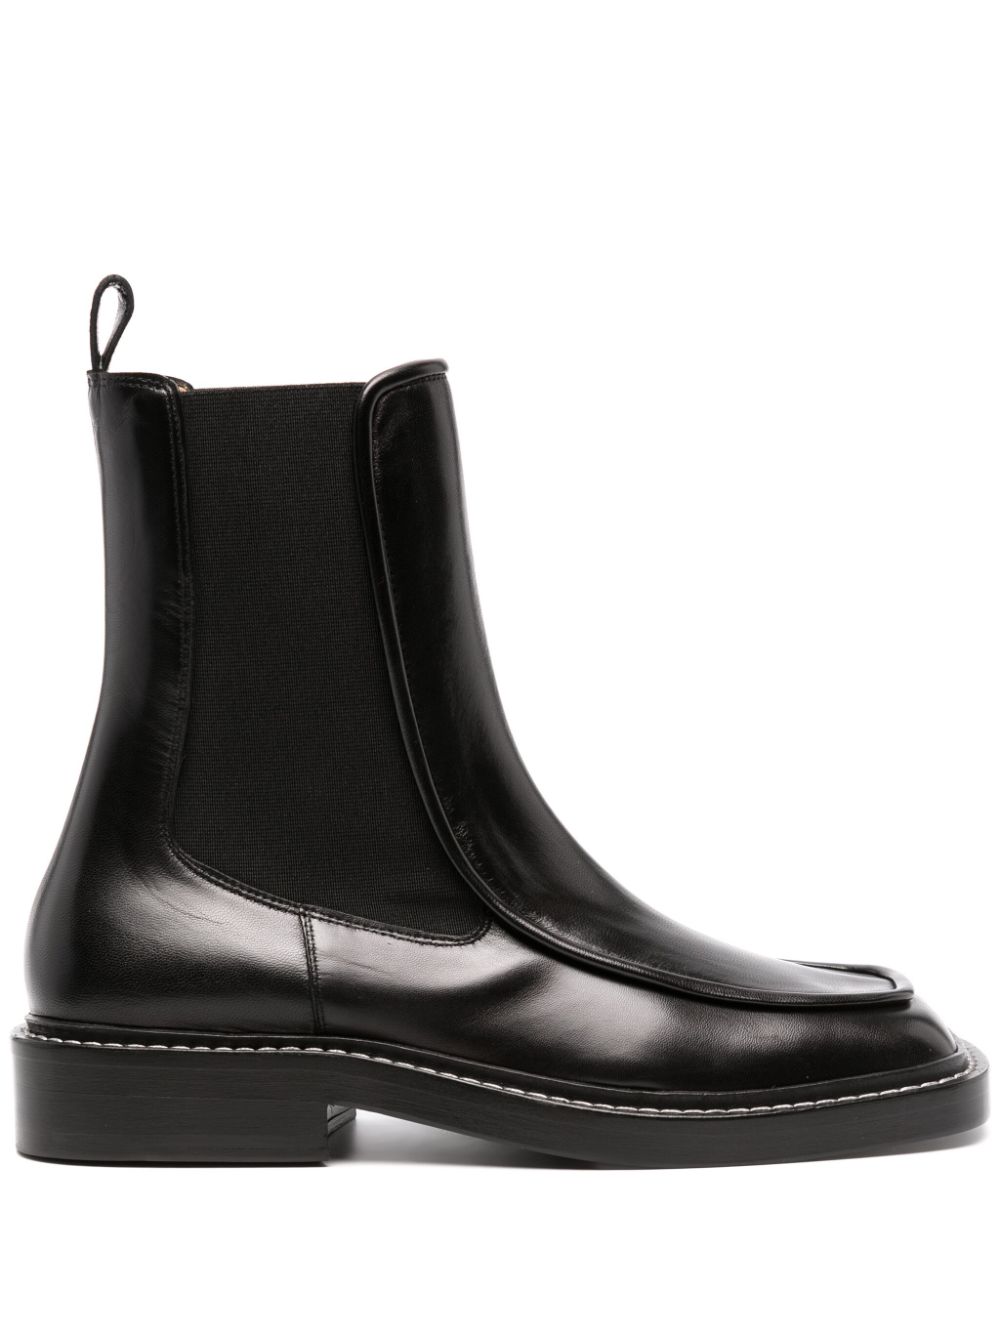 Wandler Lucy 30mm leather ankle boots - Black von Wandler